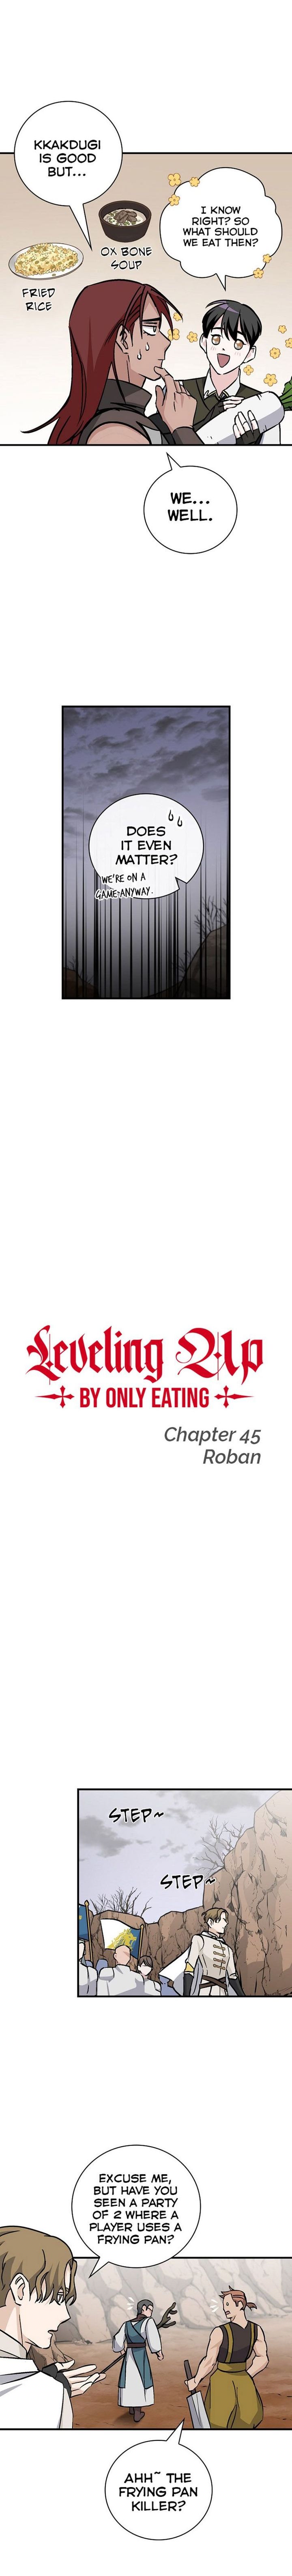 Leveling Up By Only Eating 45 3